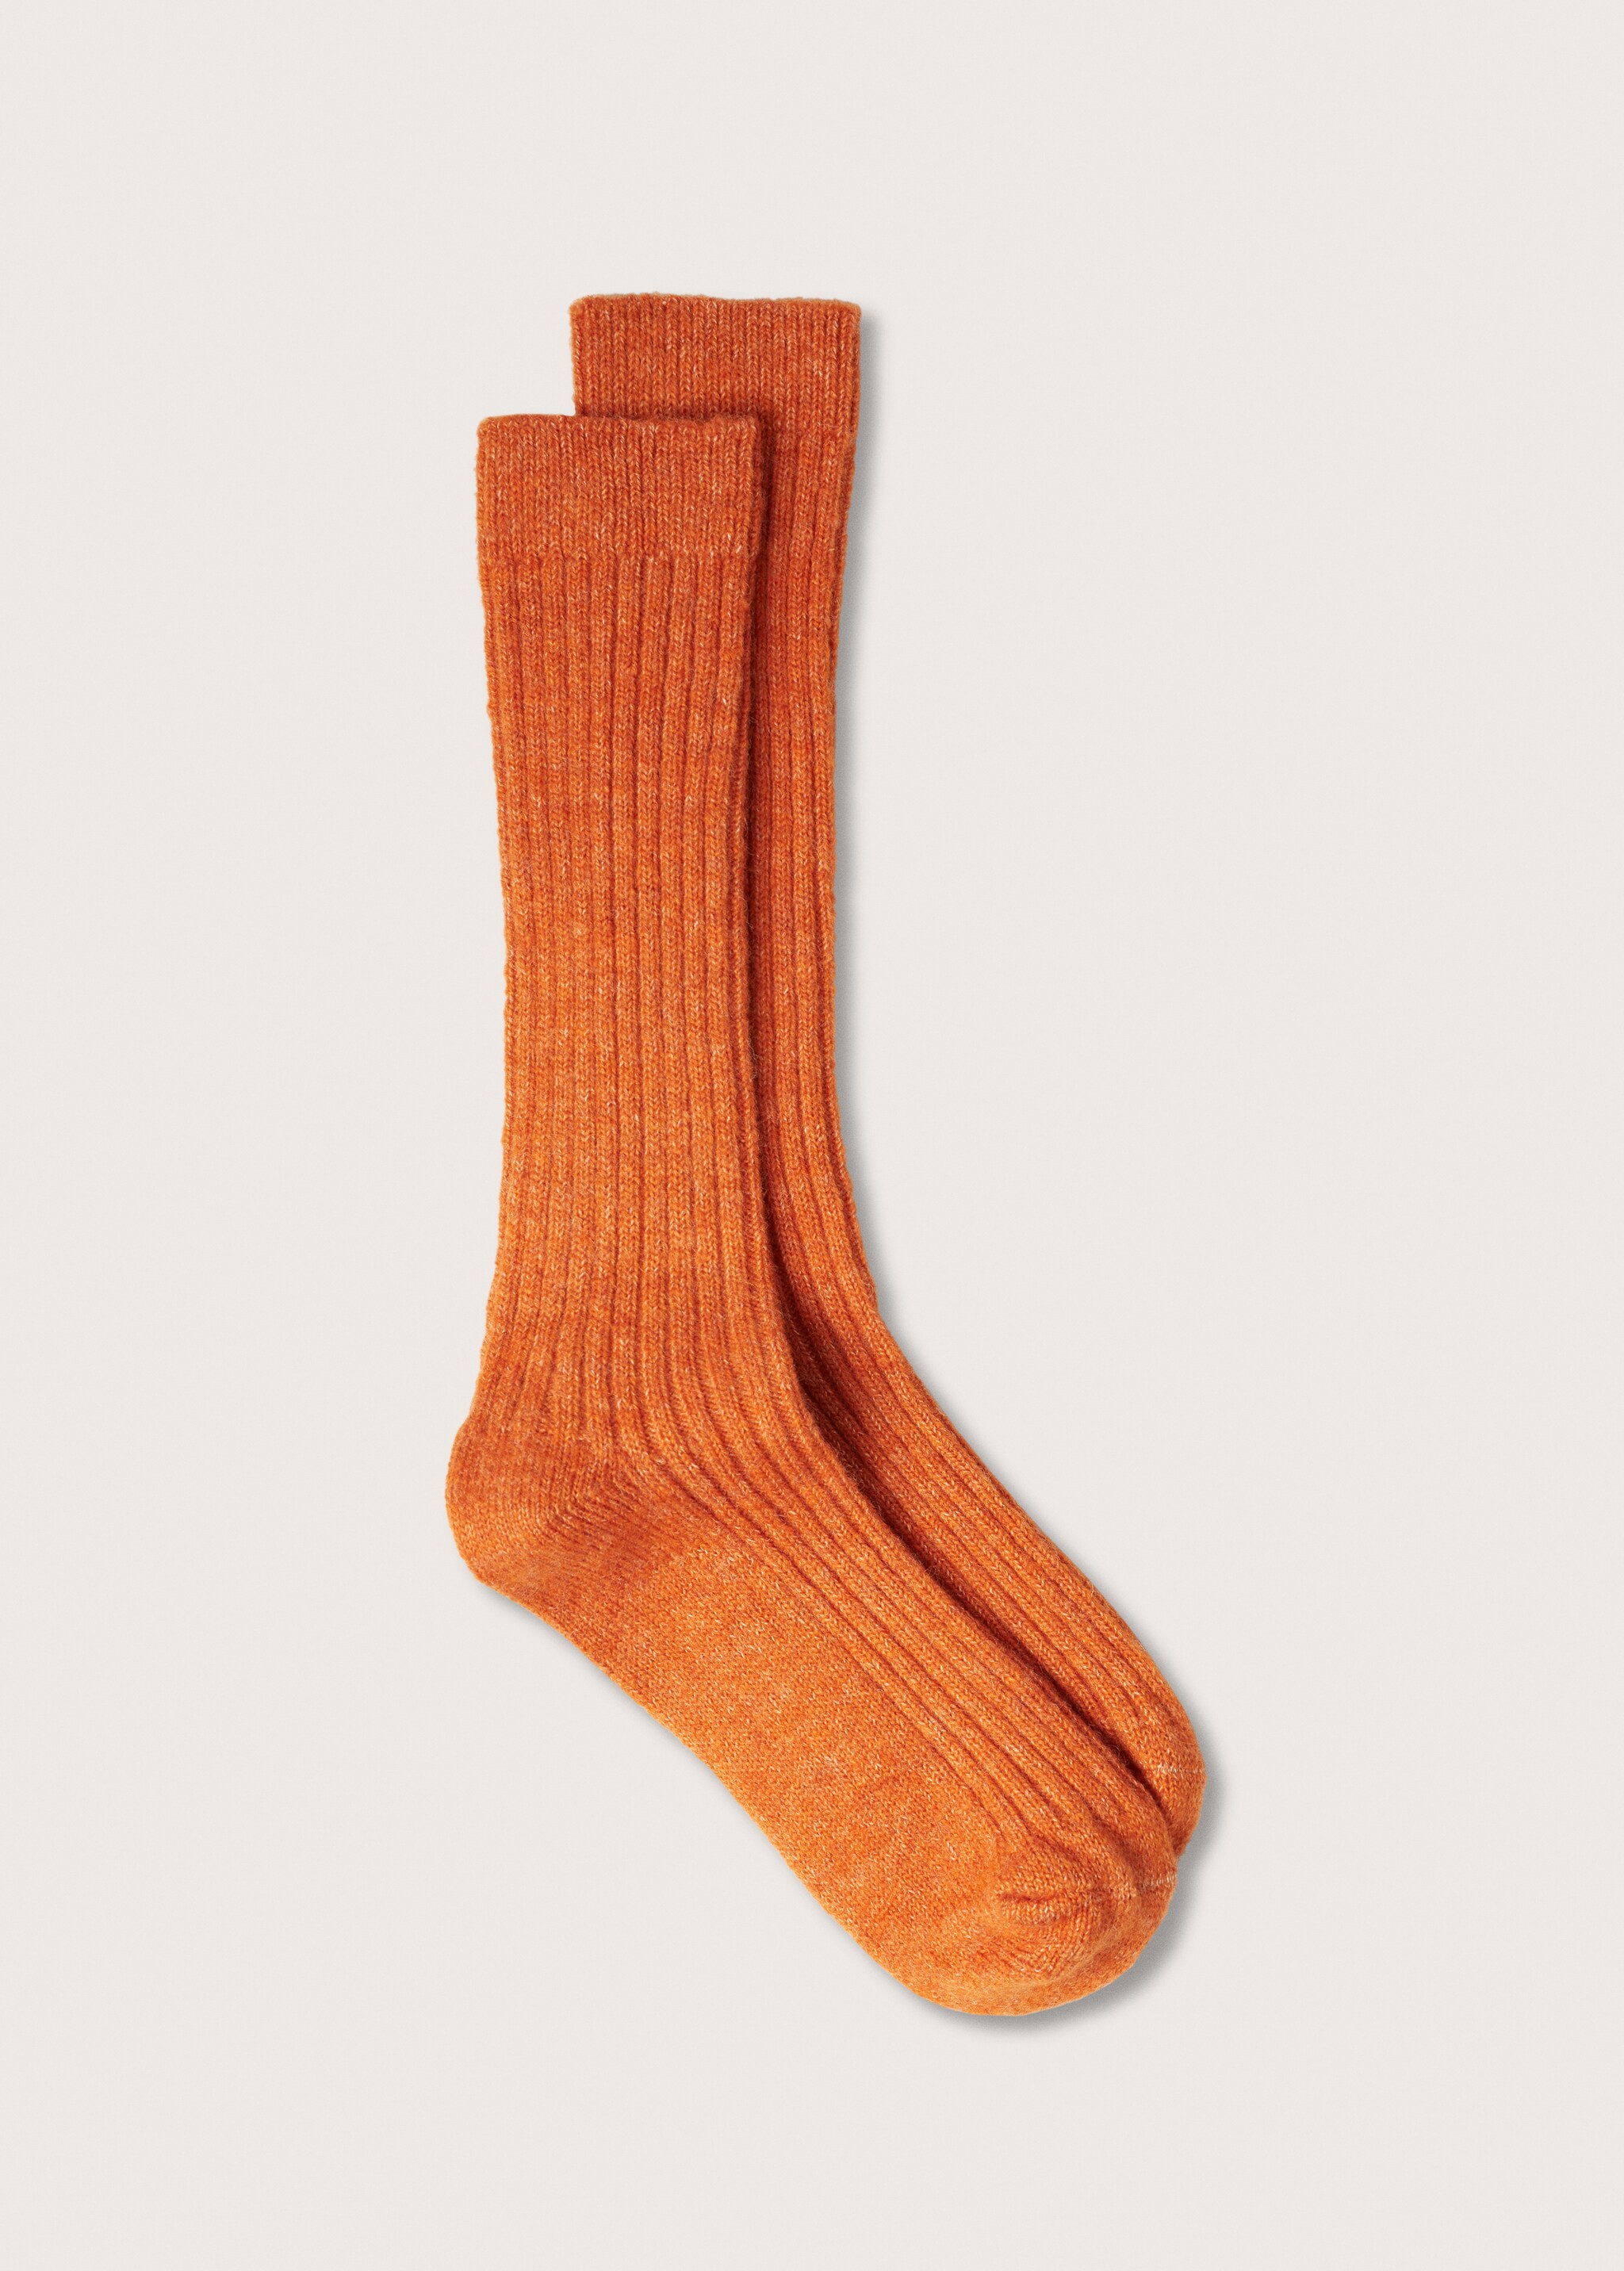 Ribbed woollen socks - Article without model